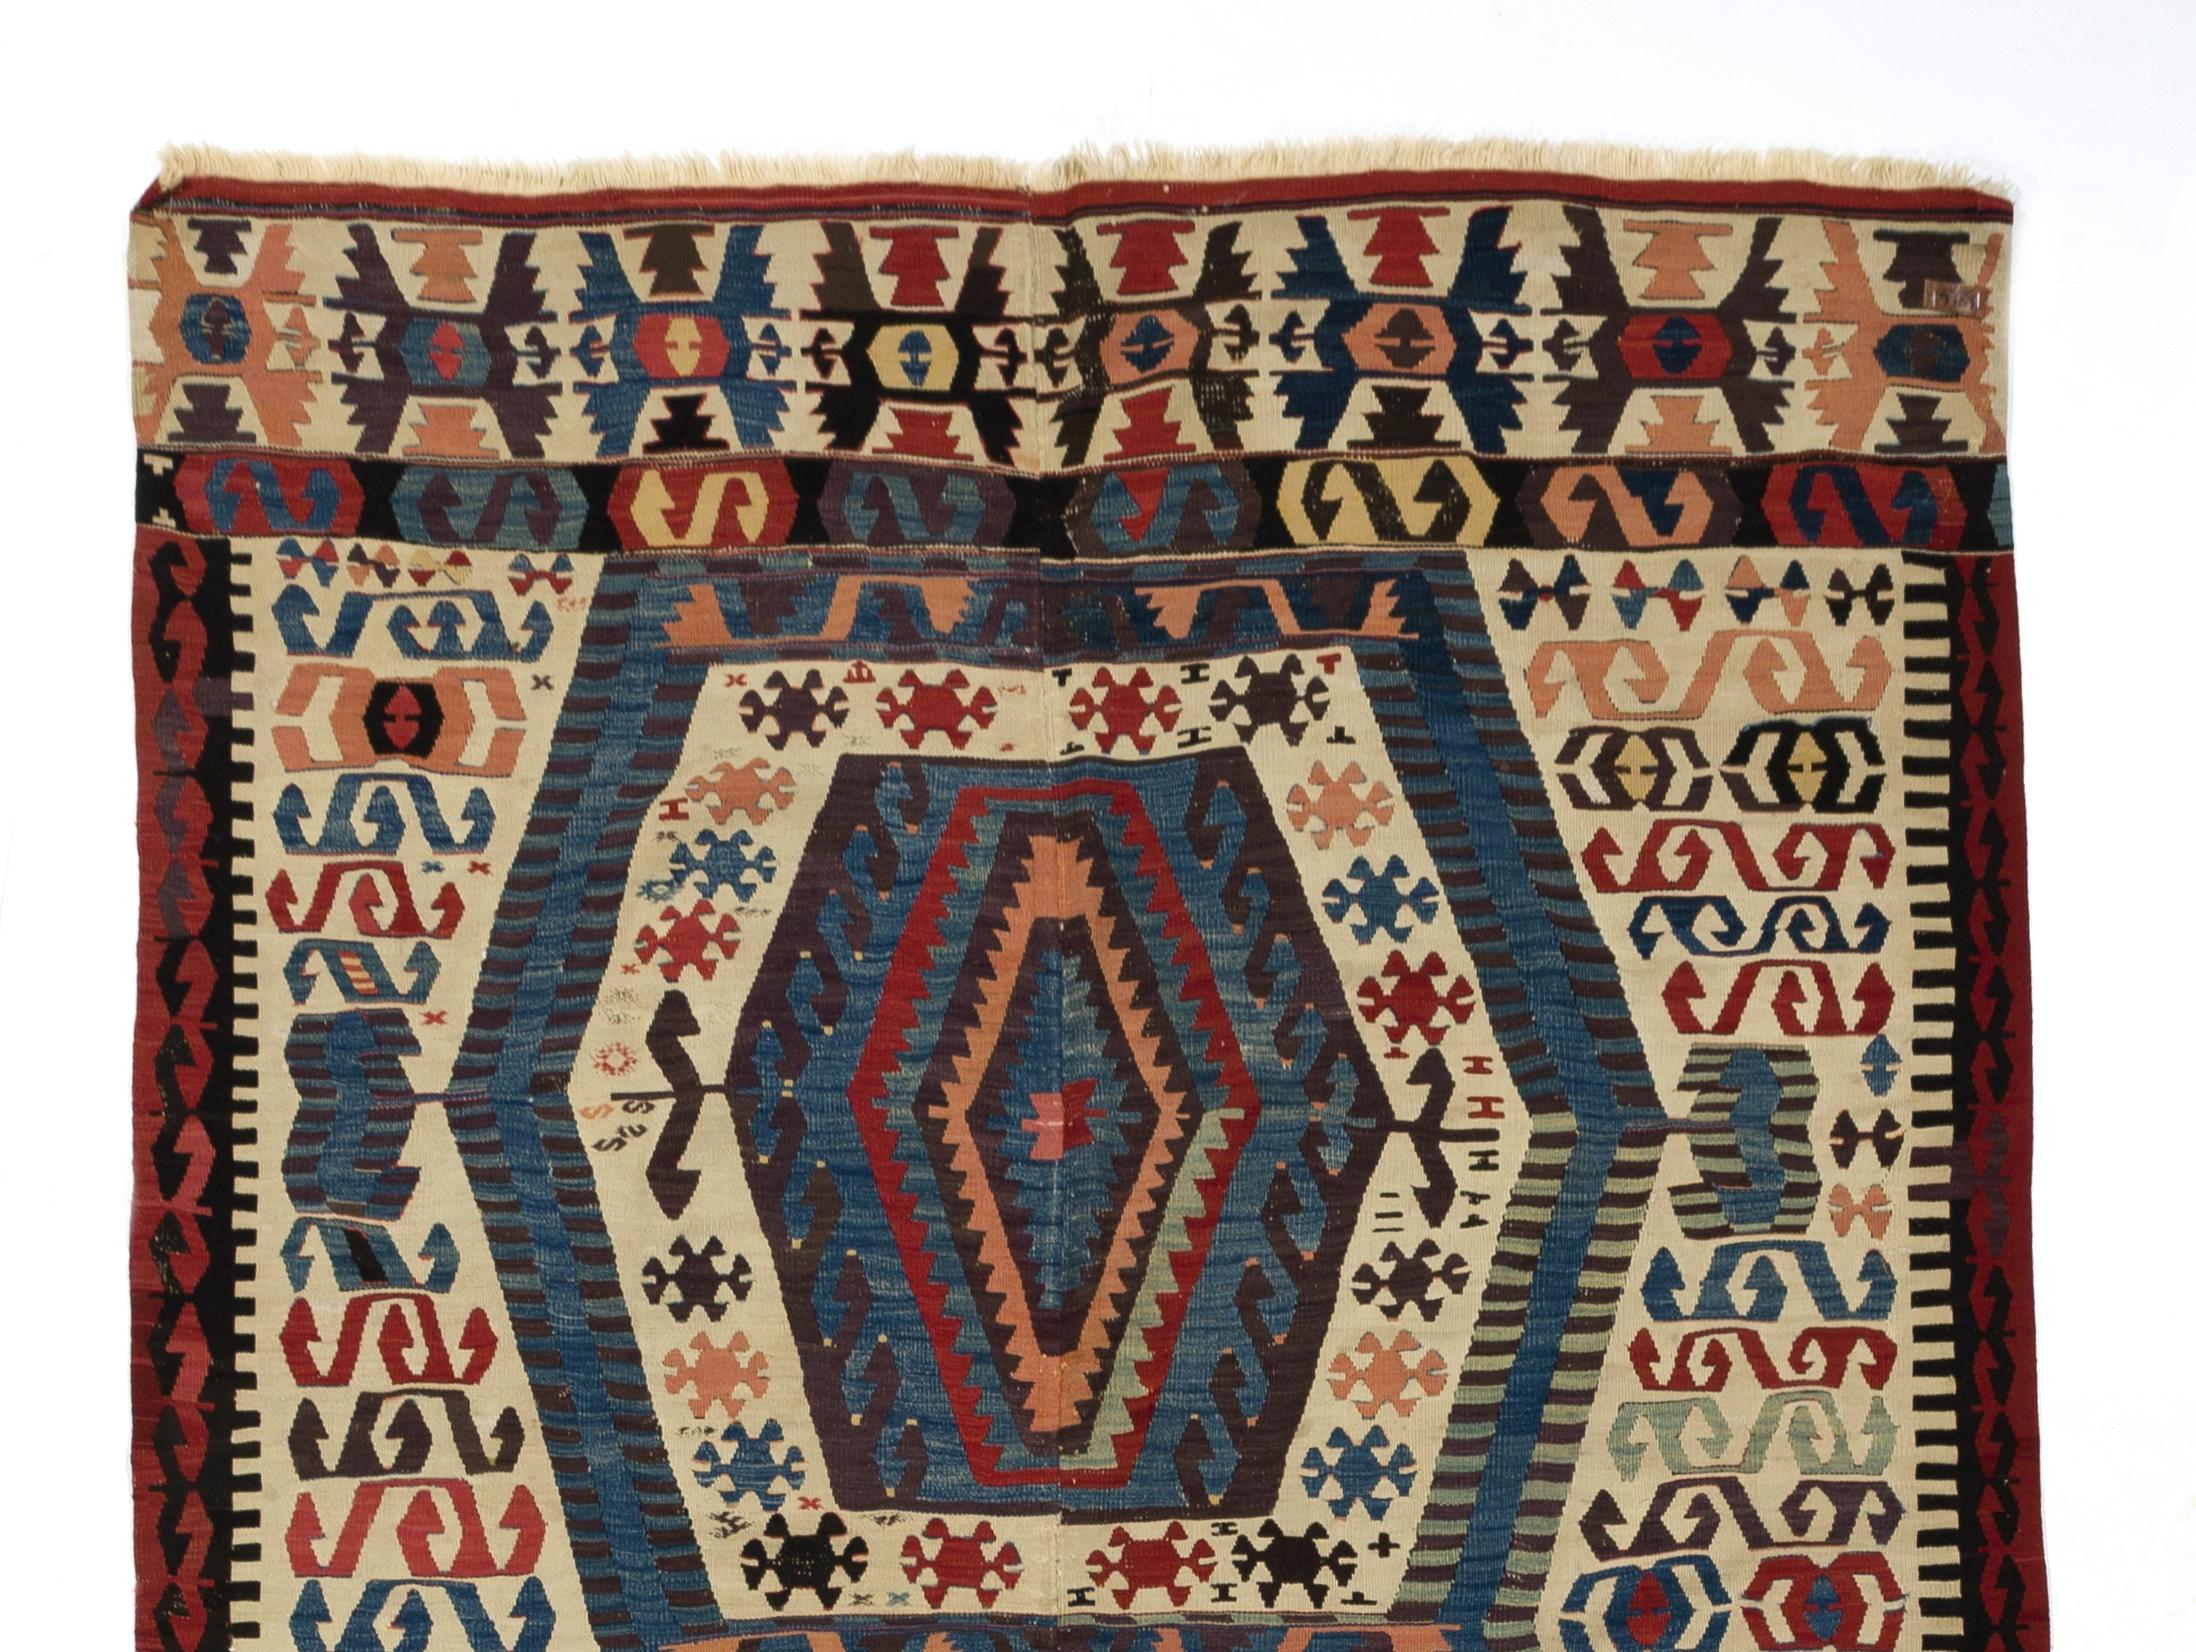 A striking work of antique textile art from west Anatolia. This finely hand-woven wool kilim with beautifully saturated natural dyes is from a private collection of early Turkish flat-weaves we have recently acquired. Measures: 5' x 12'3''